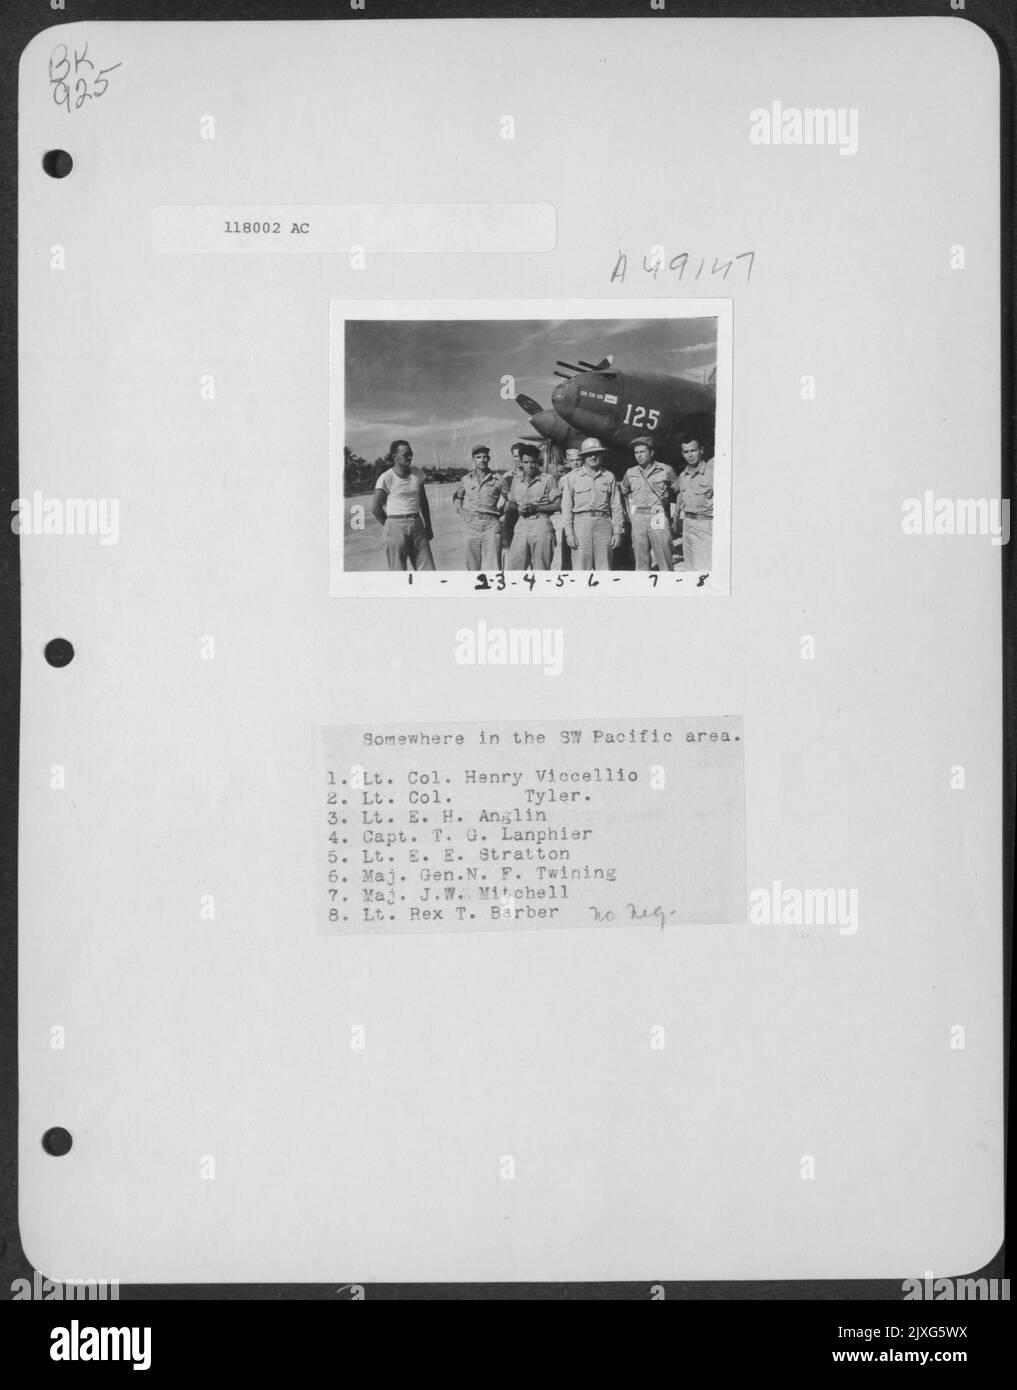 Somewhere In The Sw Pacific Area. 1. Lt. Colonel Henry Viccellio; 2. Lt. Colonel Tyler; 3. Lt. E. H. Anglin; 4. Capt. T. G. Lanphier; 5. Lt. E. E. Stratton; 6. Major General N. F. Twining; 7. Major J. W. Mitchell; 8. Lt. Rex T. Barber. [Taken C. April 18 Stock Photo